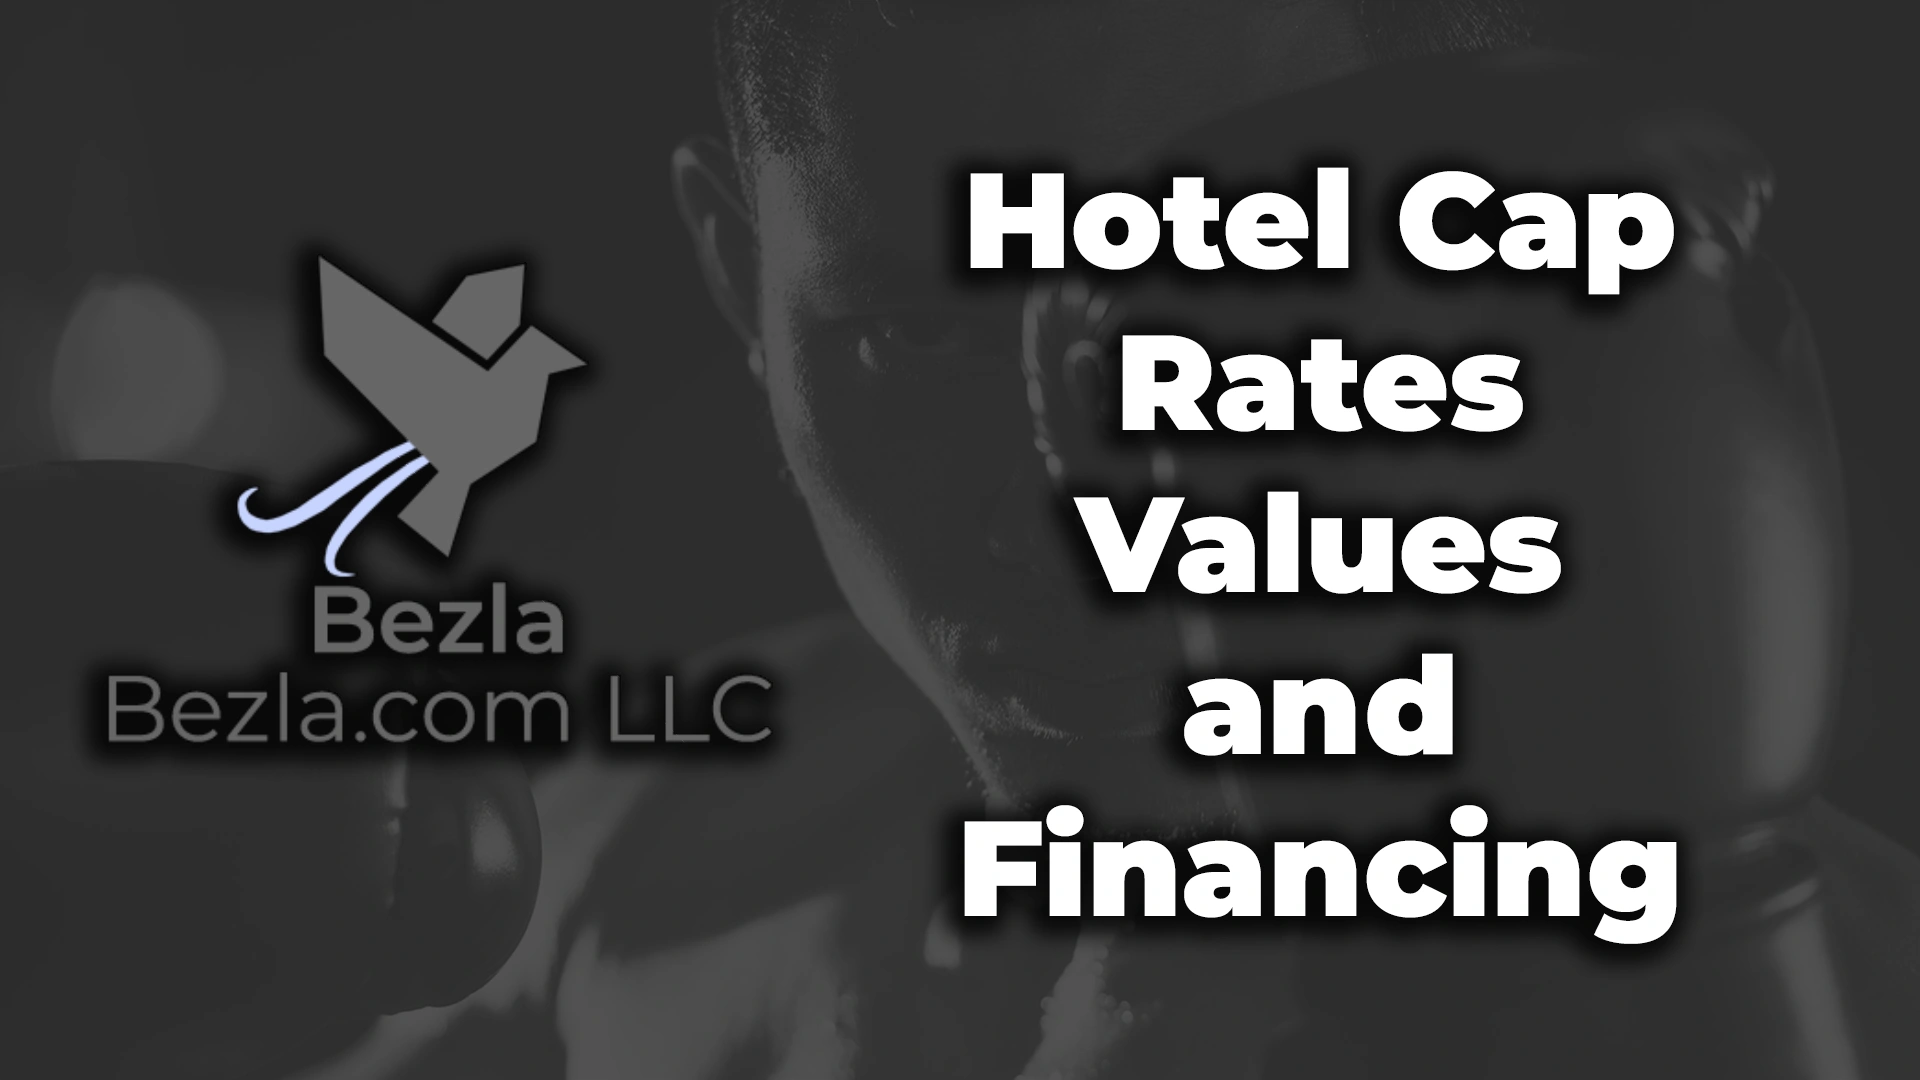 Hotel Cap Rates Values and Financing Hotel Marketing